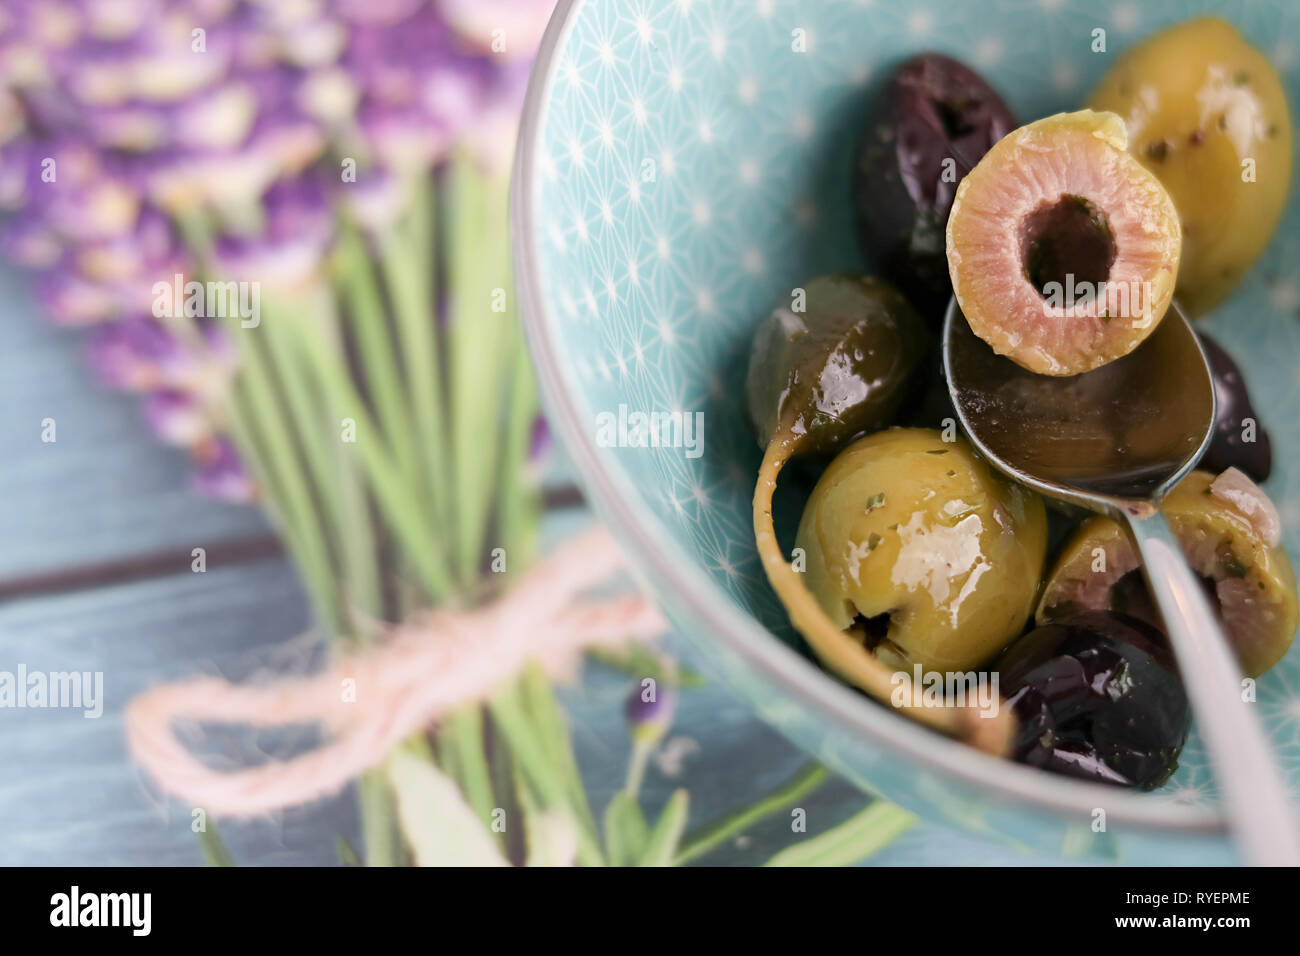 mixed olives on decorated table with copy space Stock Photo